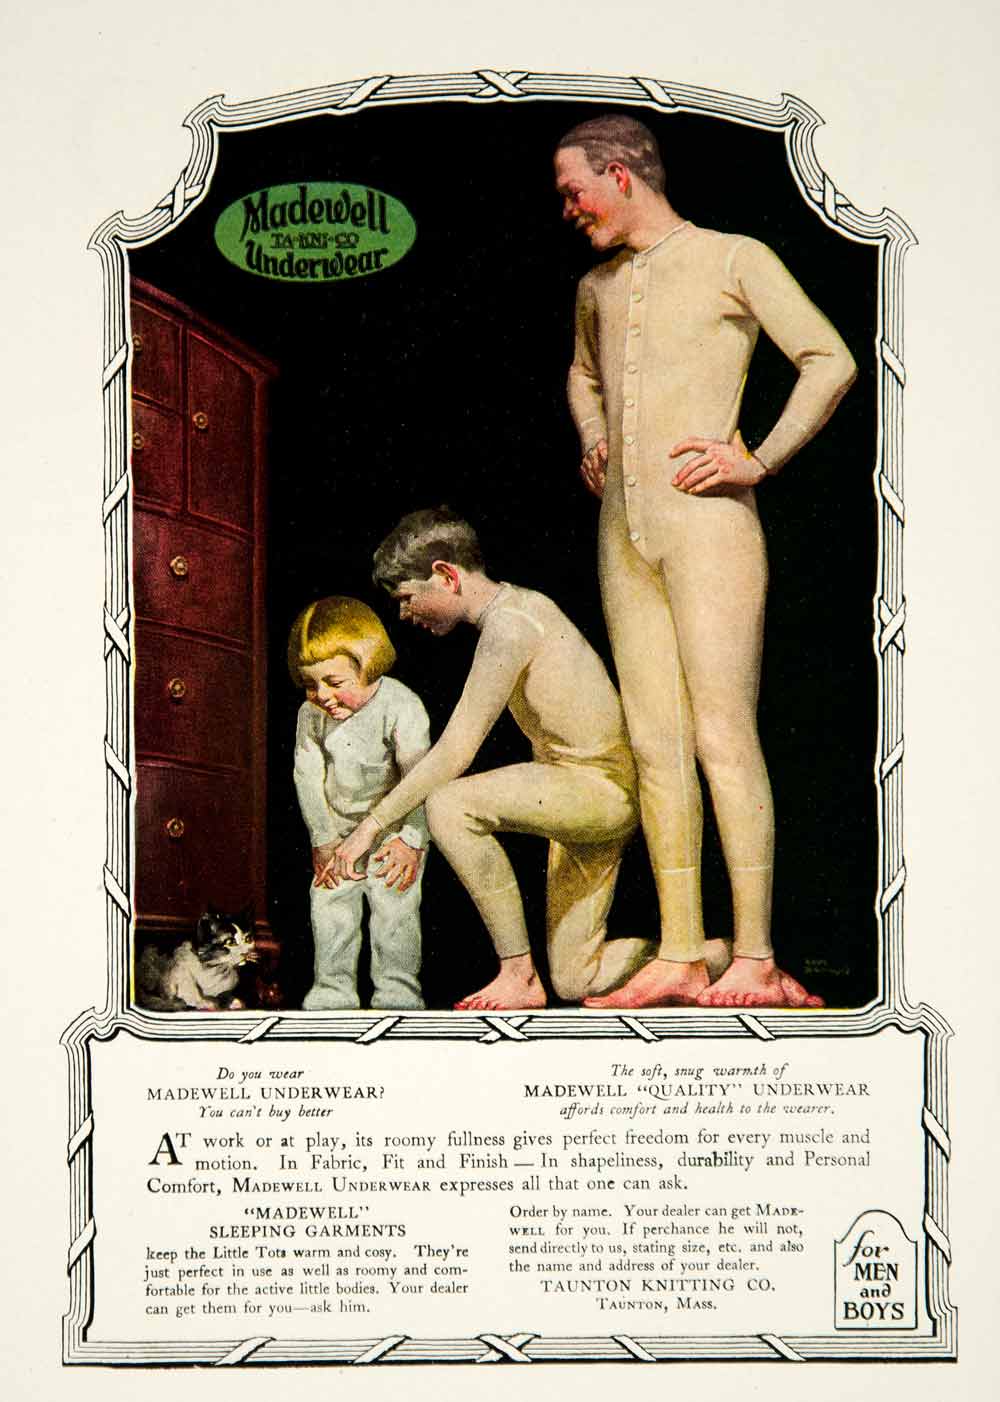 1920 Ad Taunton Knitting Co. Madewell Underwear Clothing Clothes Union Suit YRR2